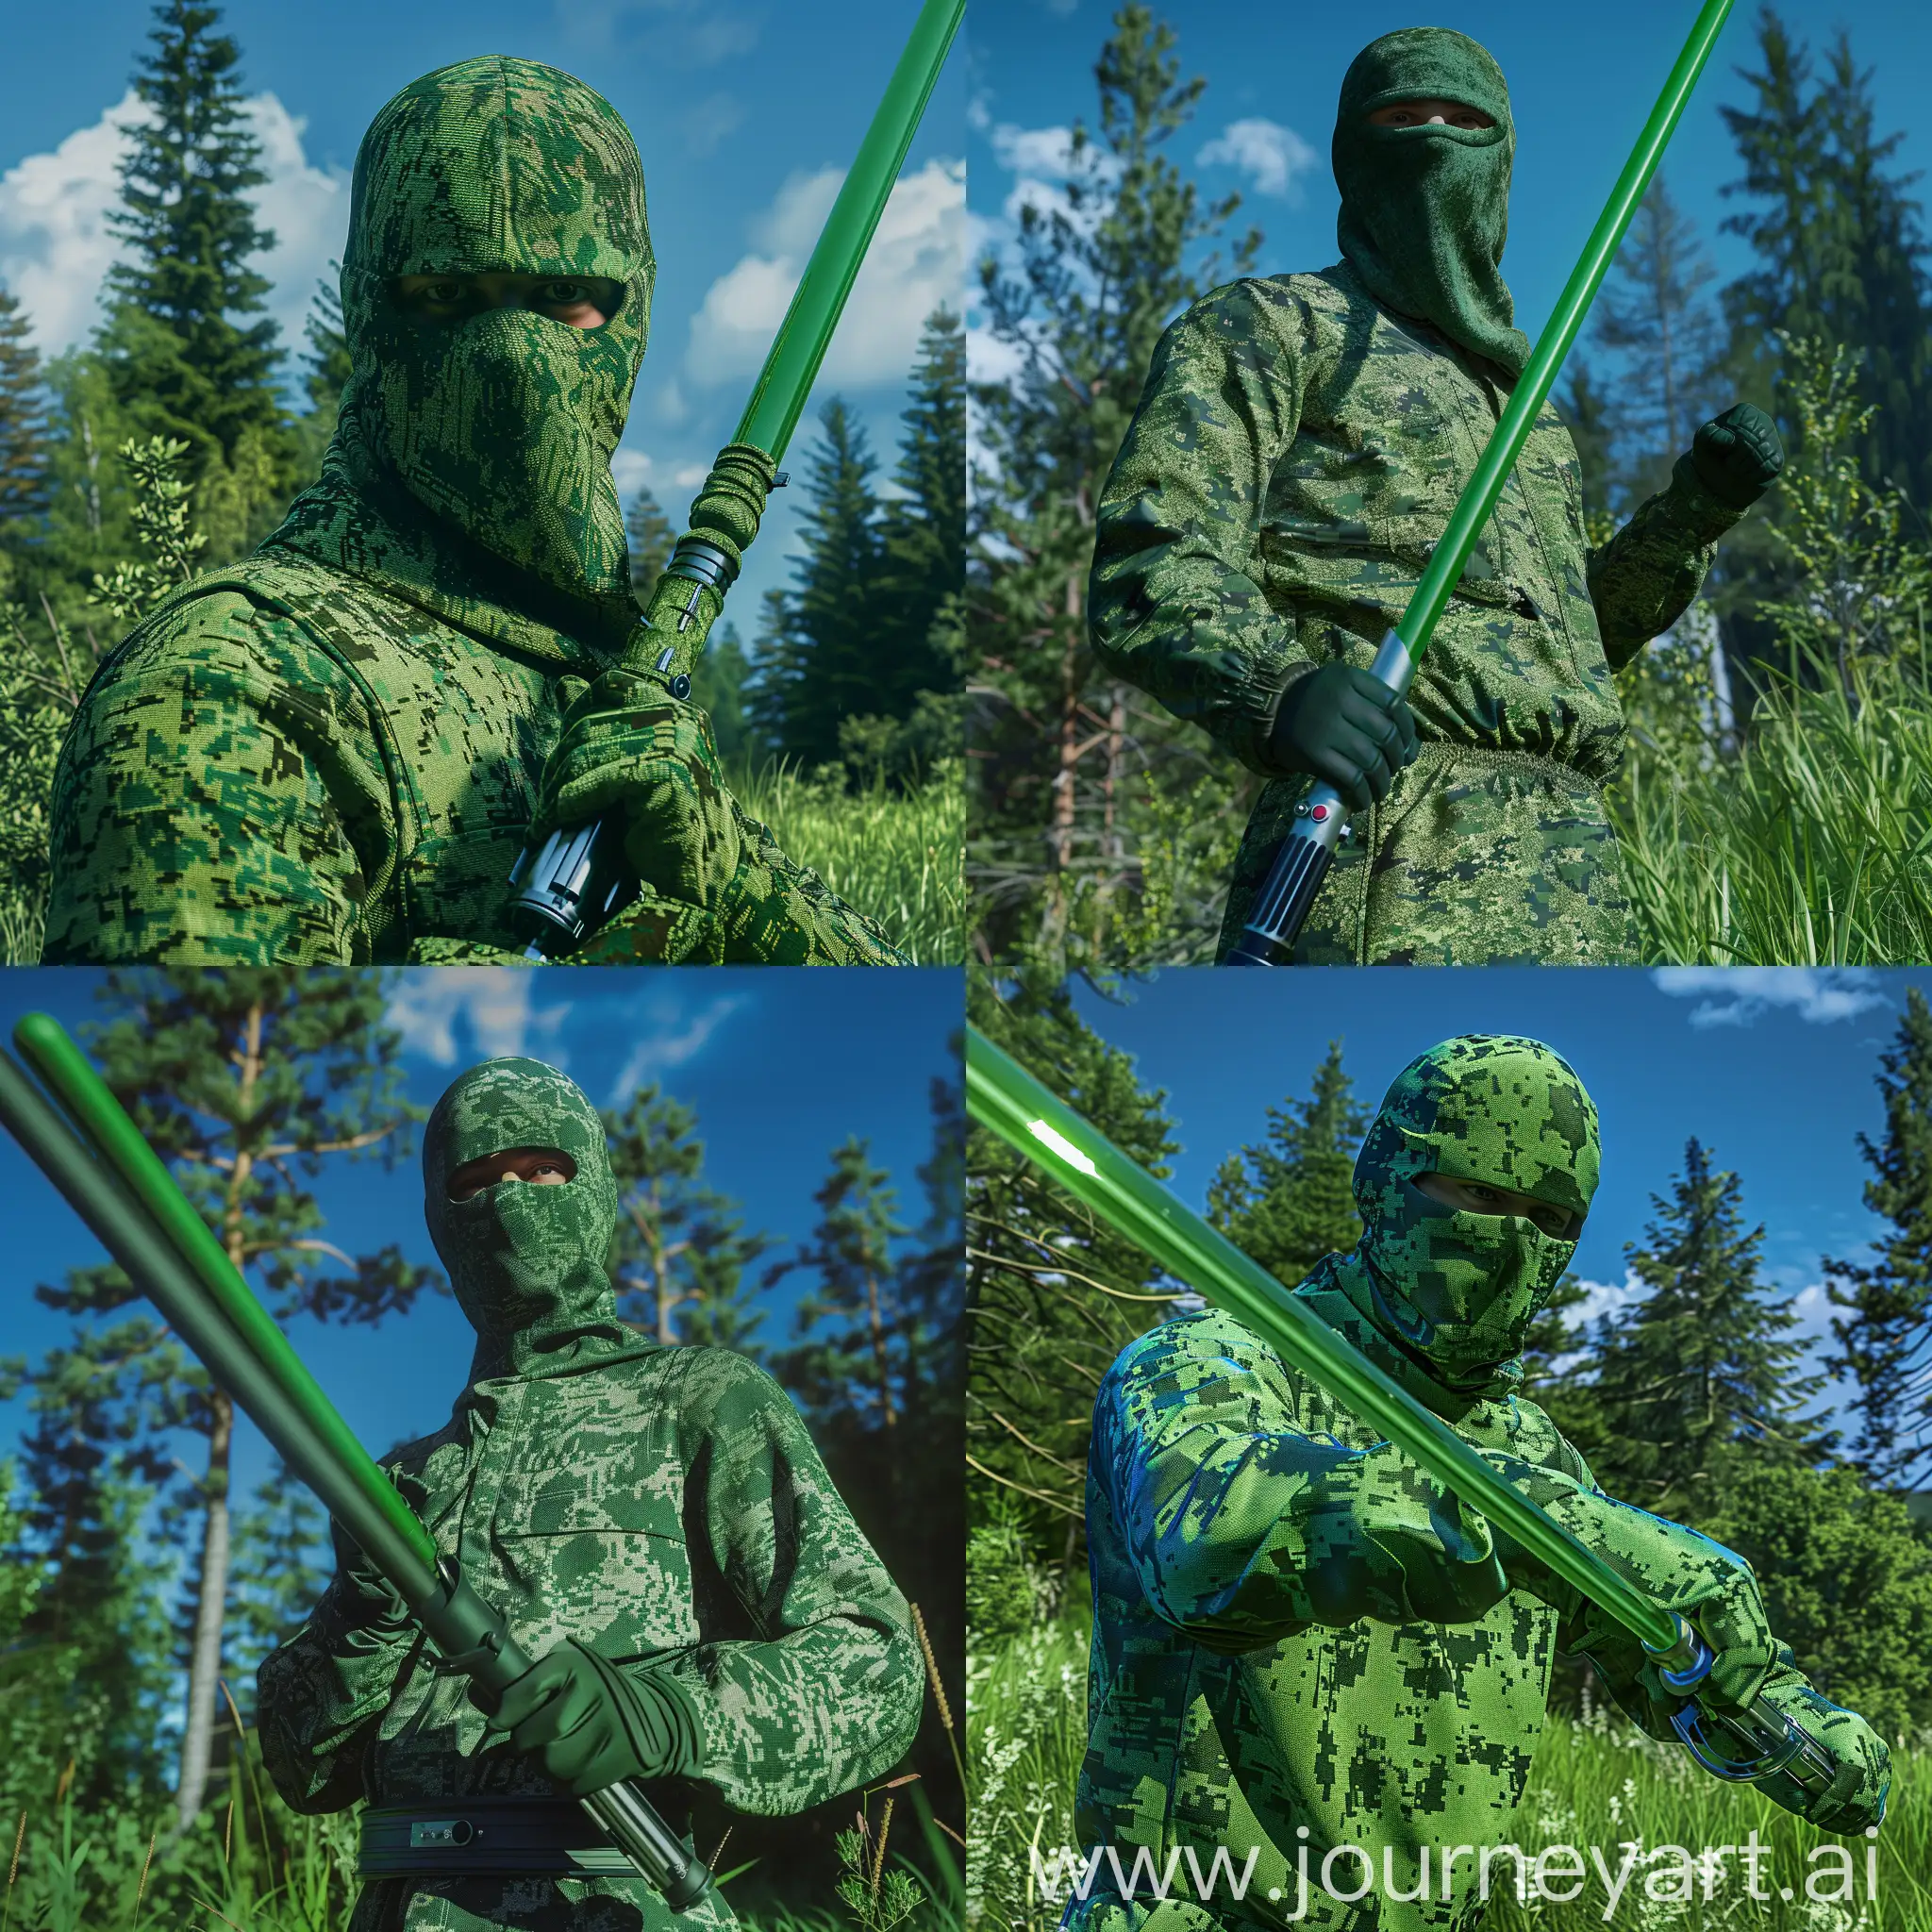 Camouflaged-Warrior-with-Star-Wars-Sword-in-Forest-Landscape